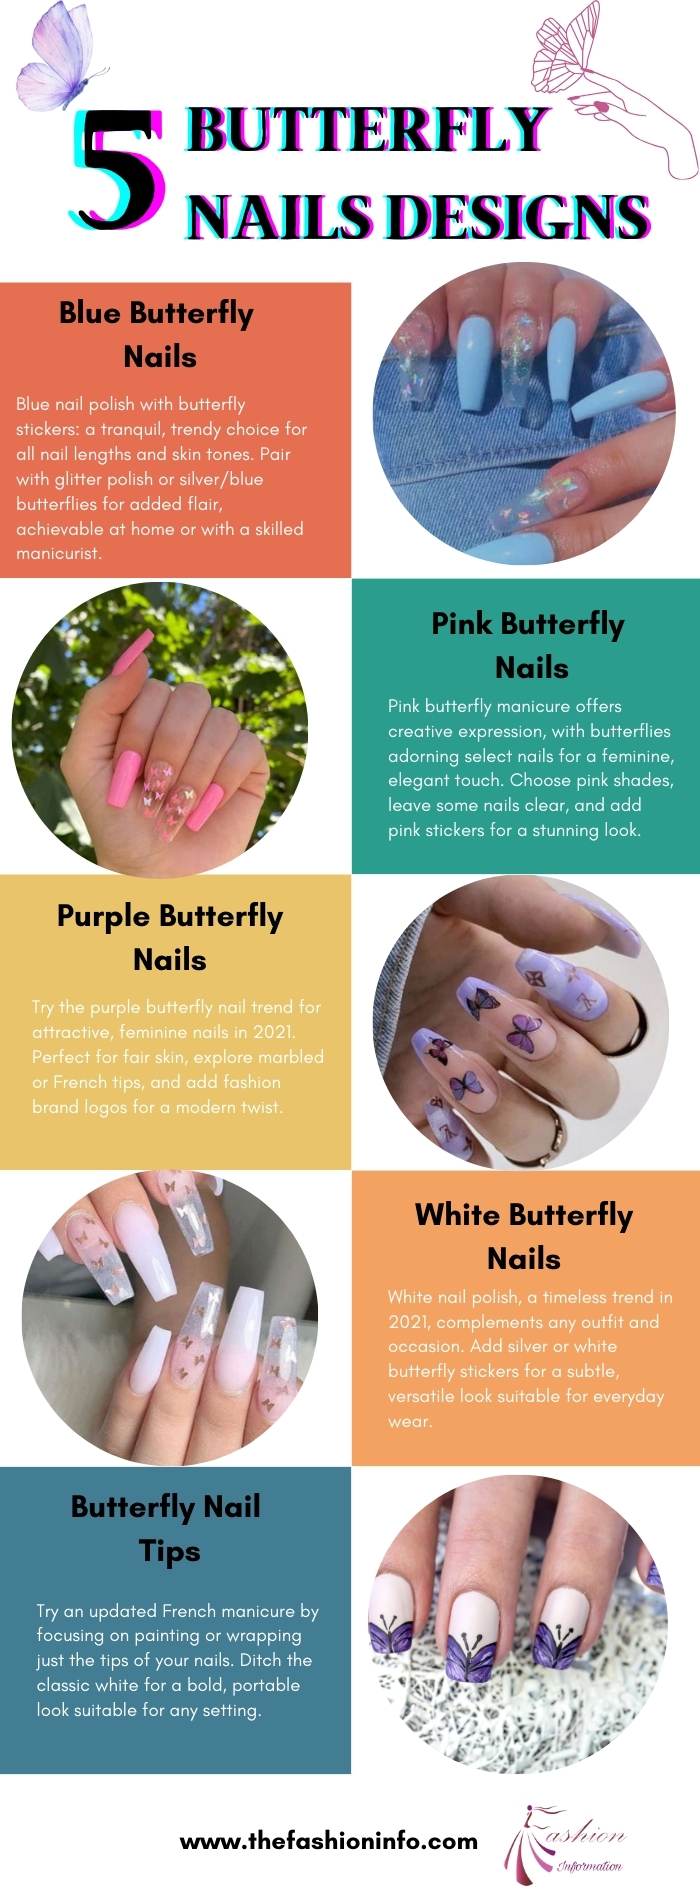 5 Butterfly nails designs